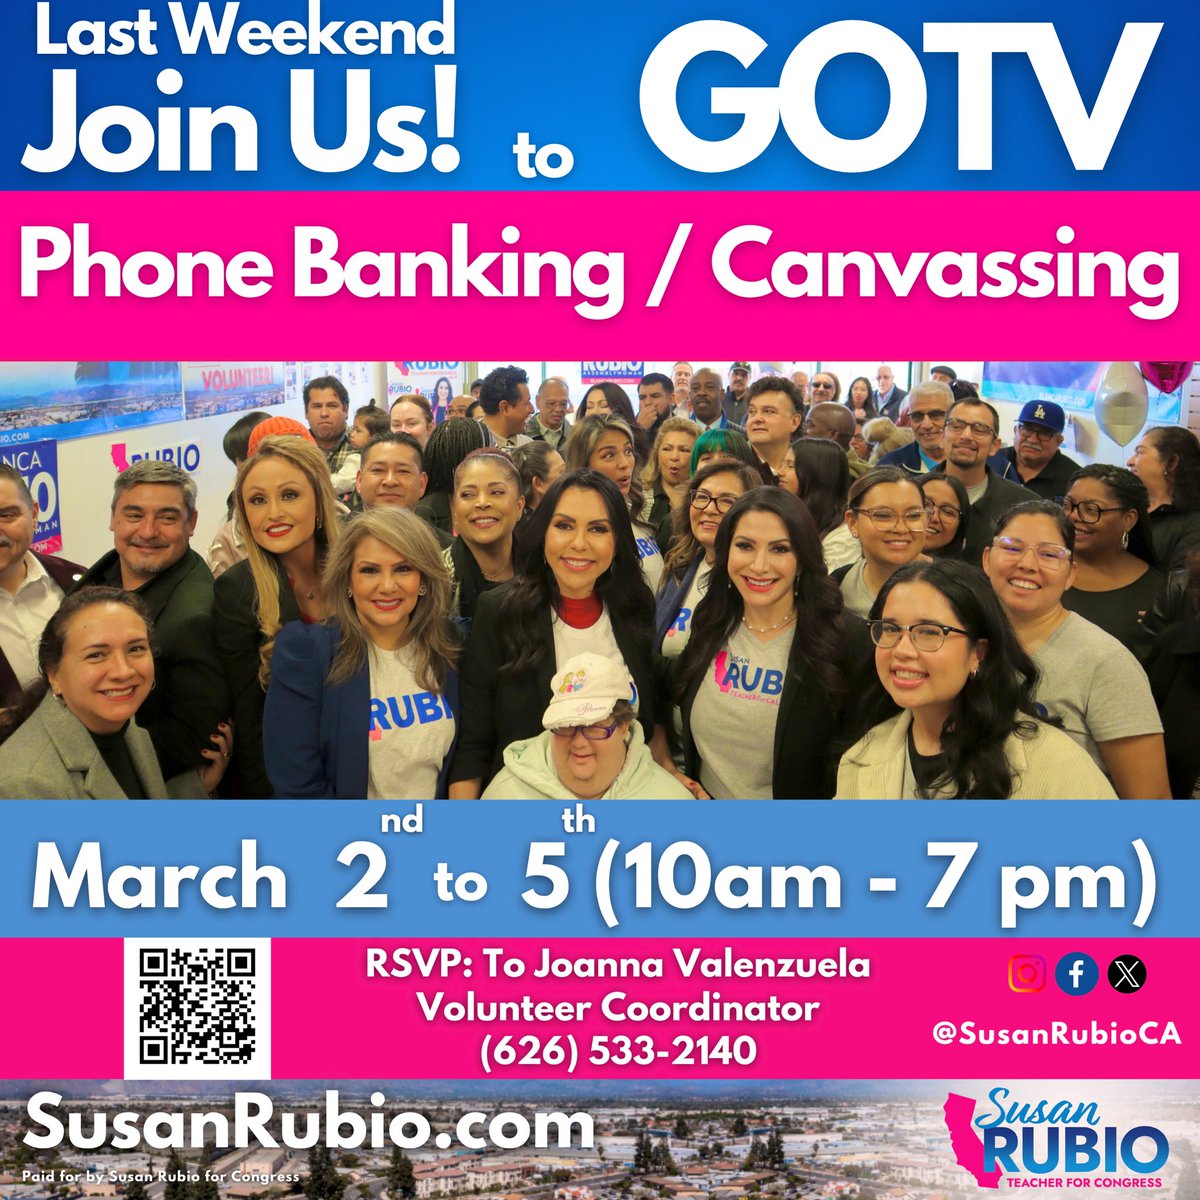 It's GOTV time! Let's not be silenced by low turnout qnd millions of dollars spent on lies. Your support is crucial for #TeamRubio to ensure that the #SGV has true representation. Every vote counts, every voice matters. Join us to uplift our community! 🗳️✊ #GOTV #Latina